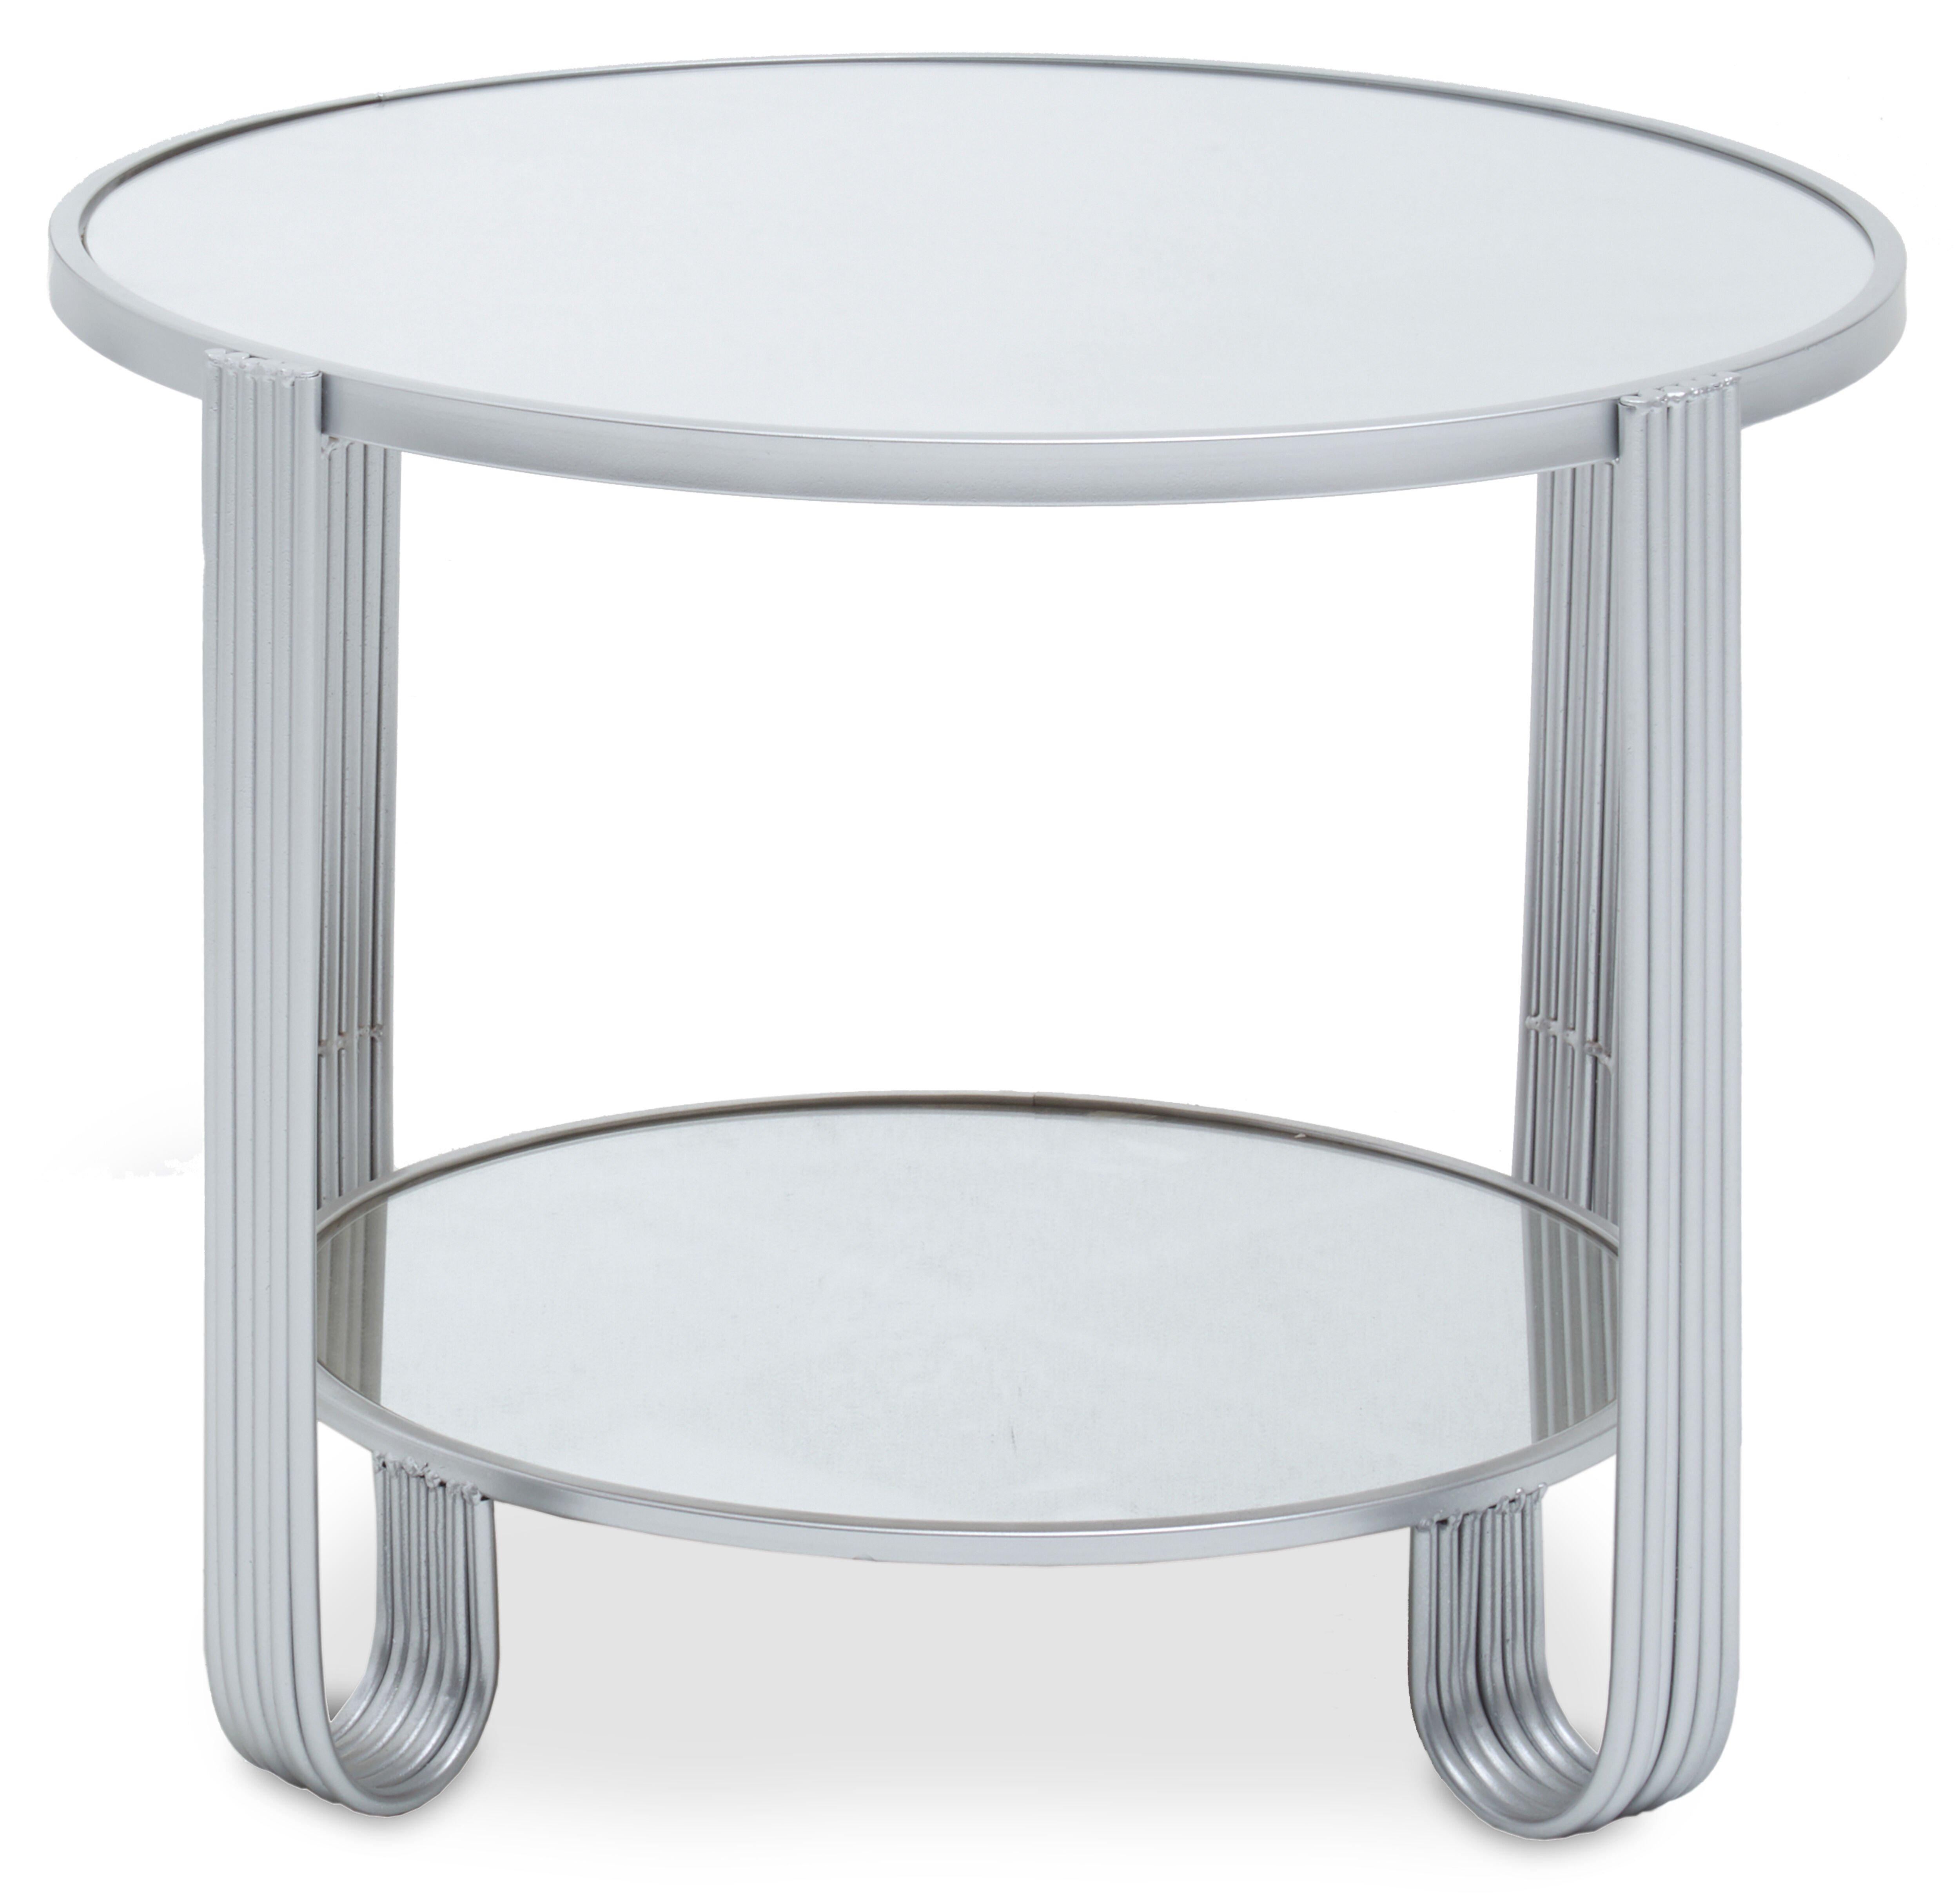 Jolie Round Mirrored Top Frame Table